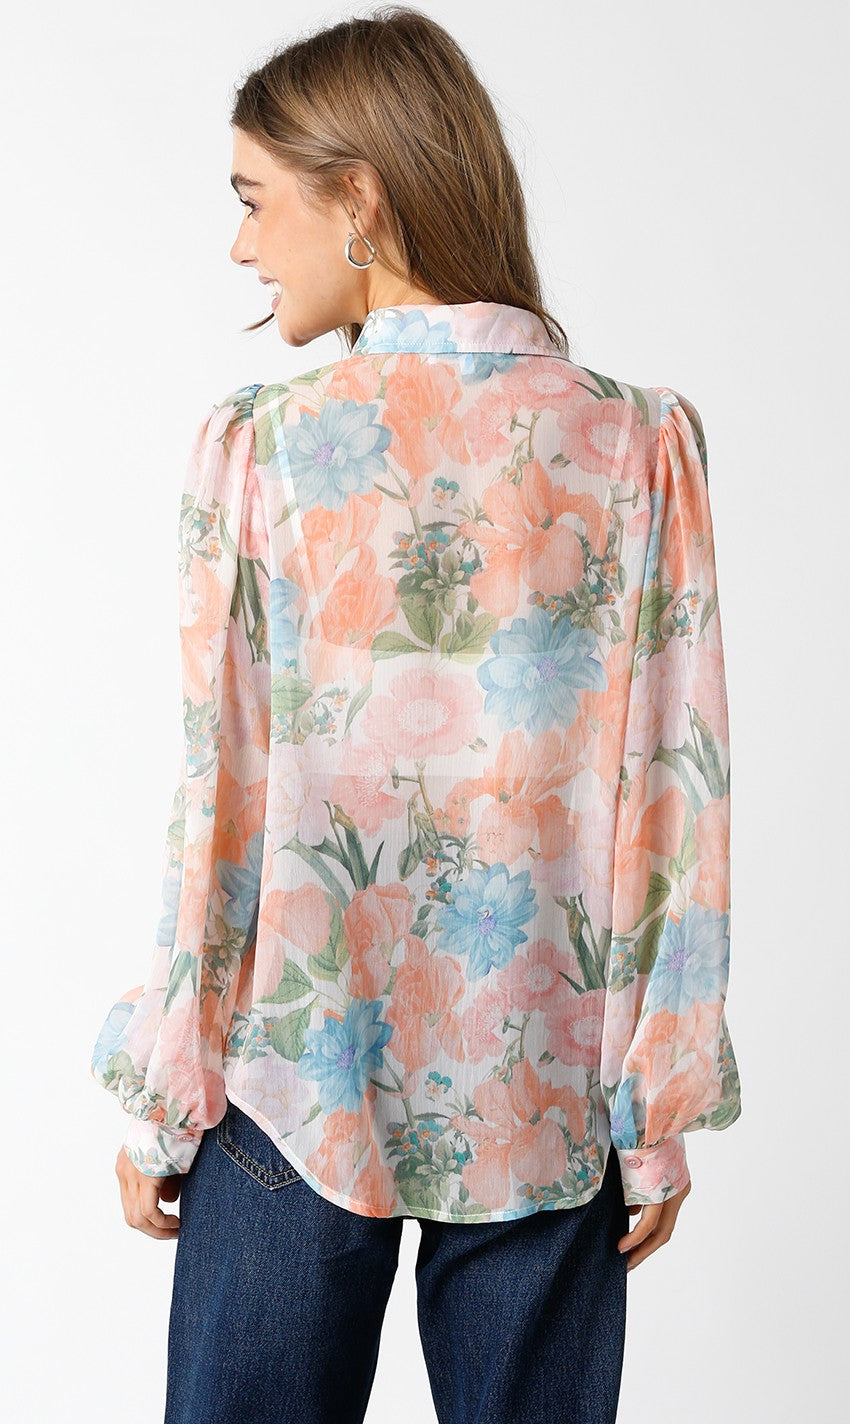 The ‘Tisha Floral Top’